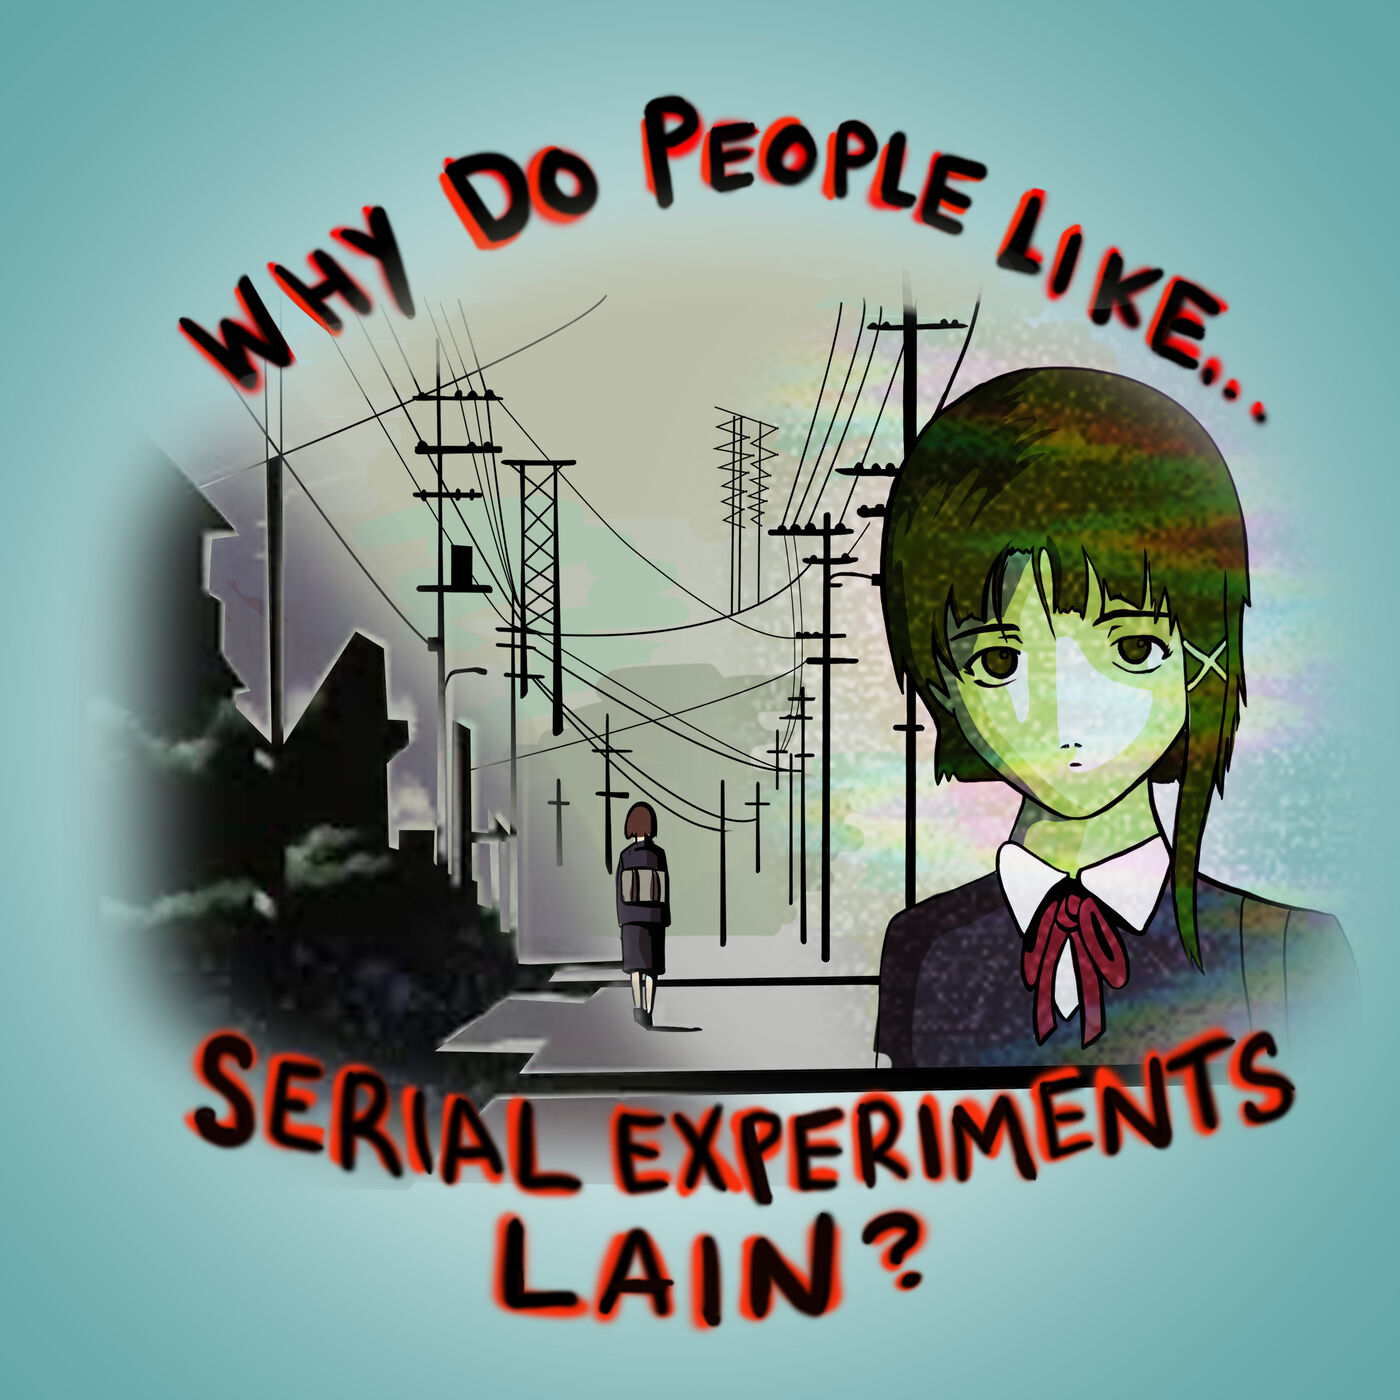 Why Do People Like Serial Experiments Lain?